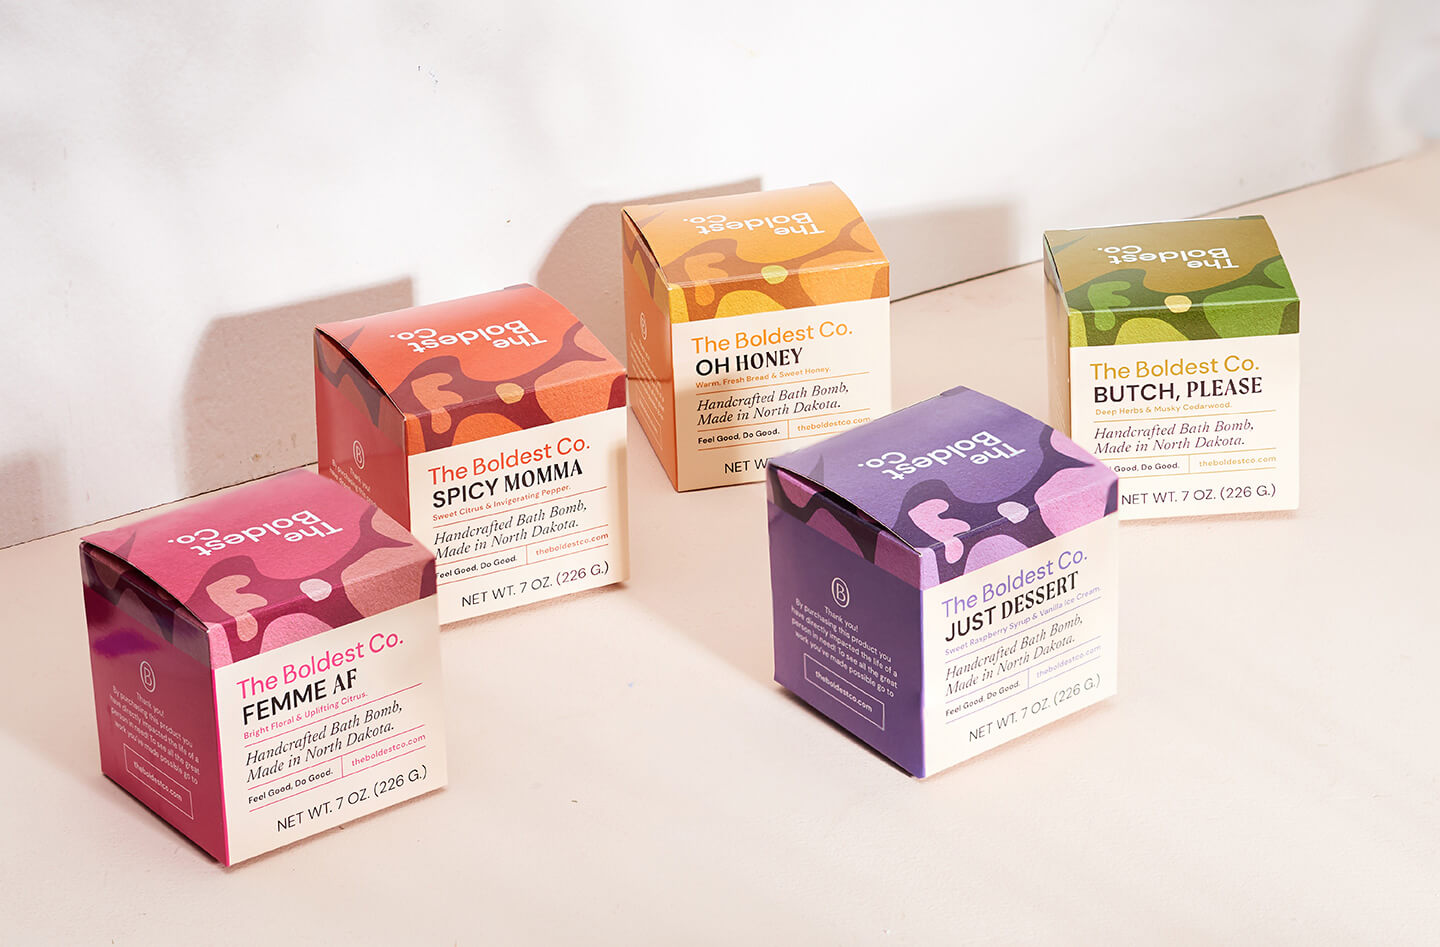 Brand design portfolio cover image showing the range of The Boldest Co soap boxes in a light cream setting. The boxes showcase the vintage-inspired blobby patterns and clean typography.